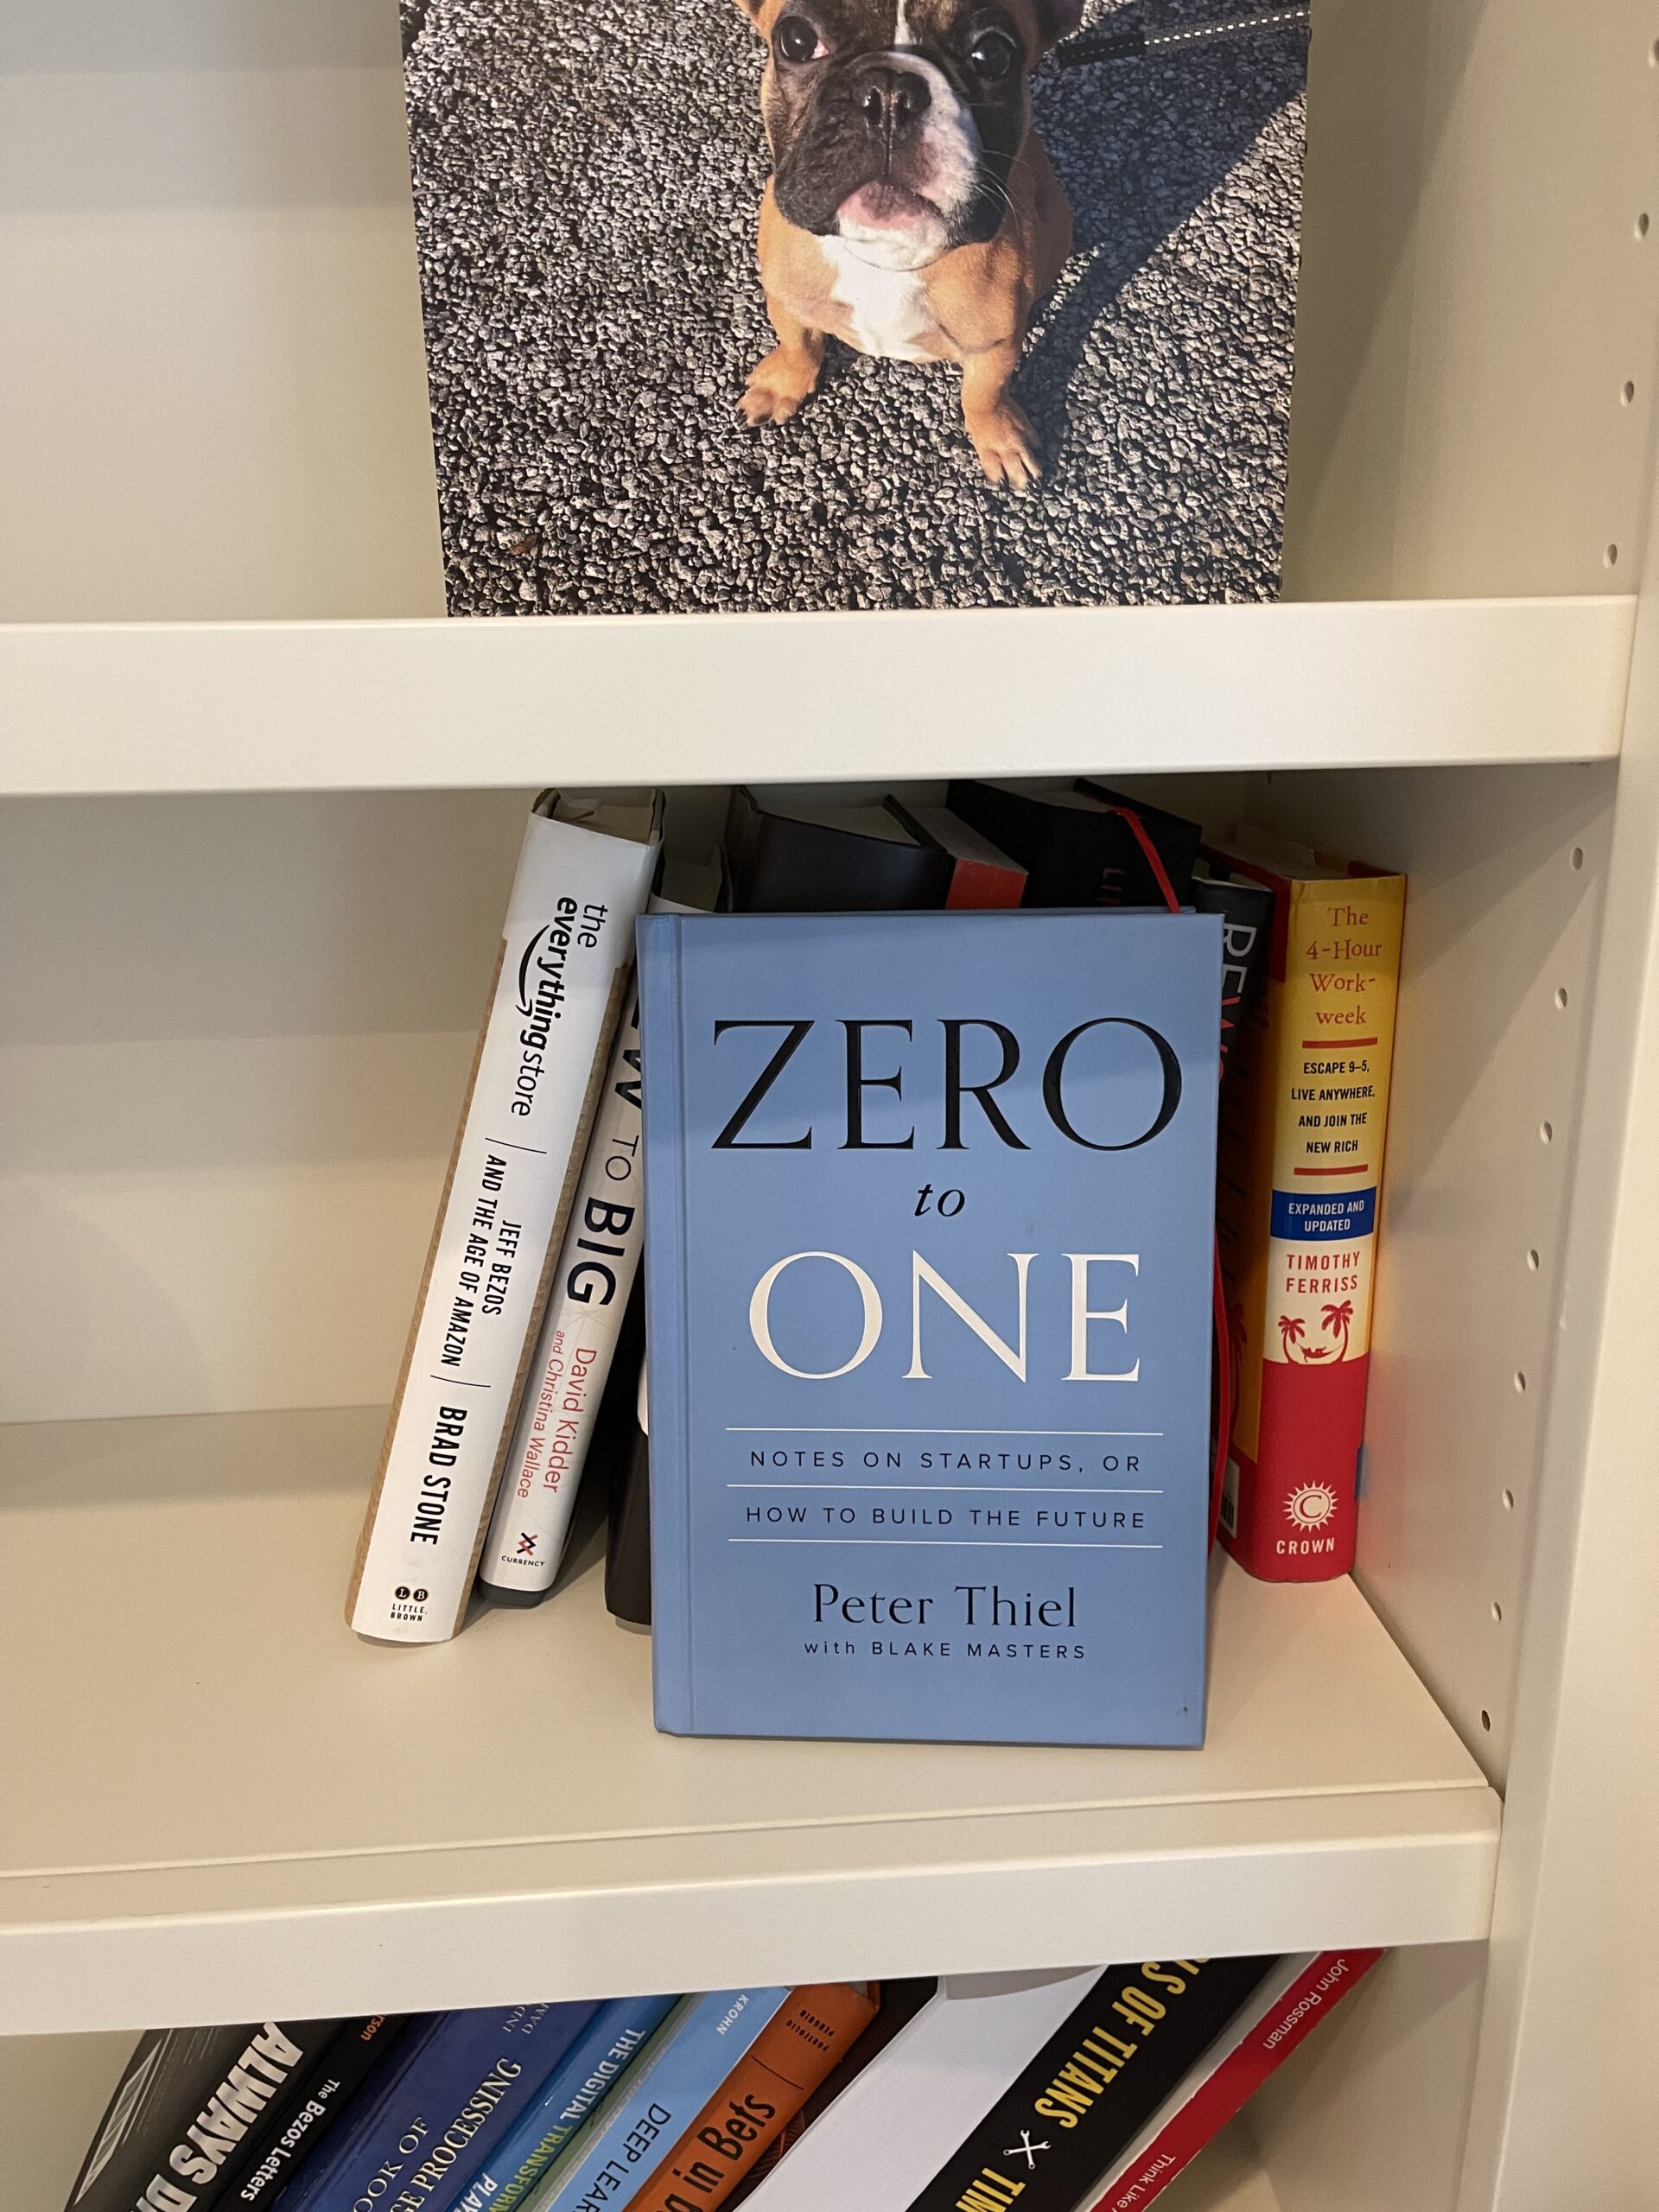 The Digital Leader Newsletter:  Insights From Peter Thiel’s “Zero to One”